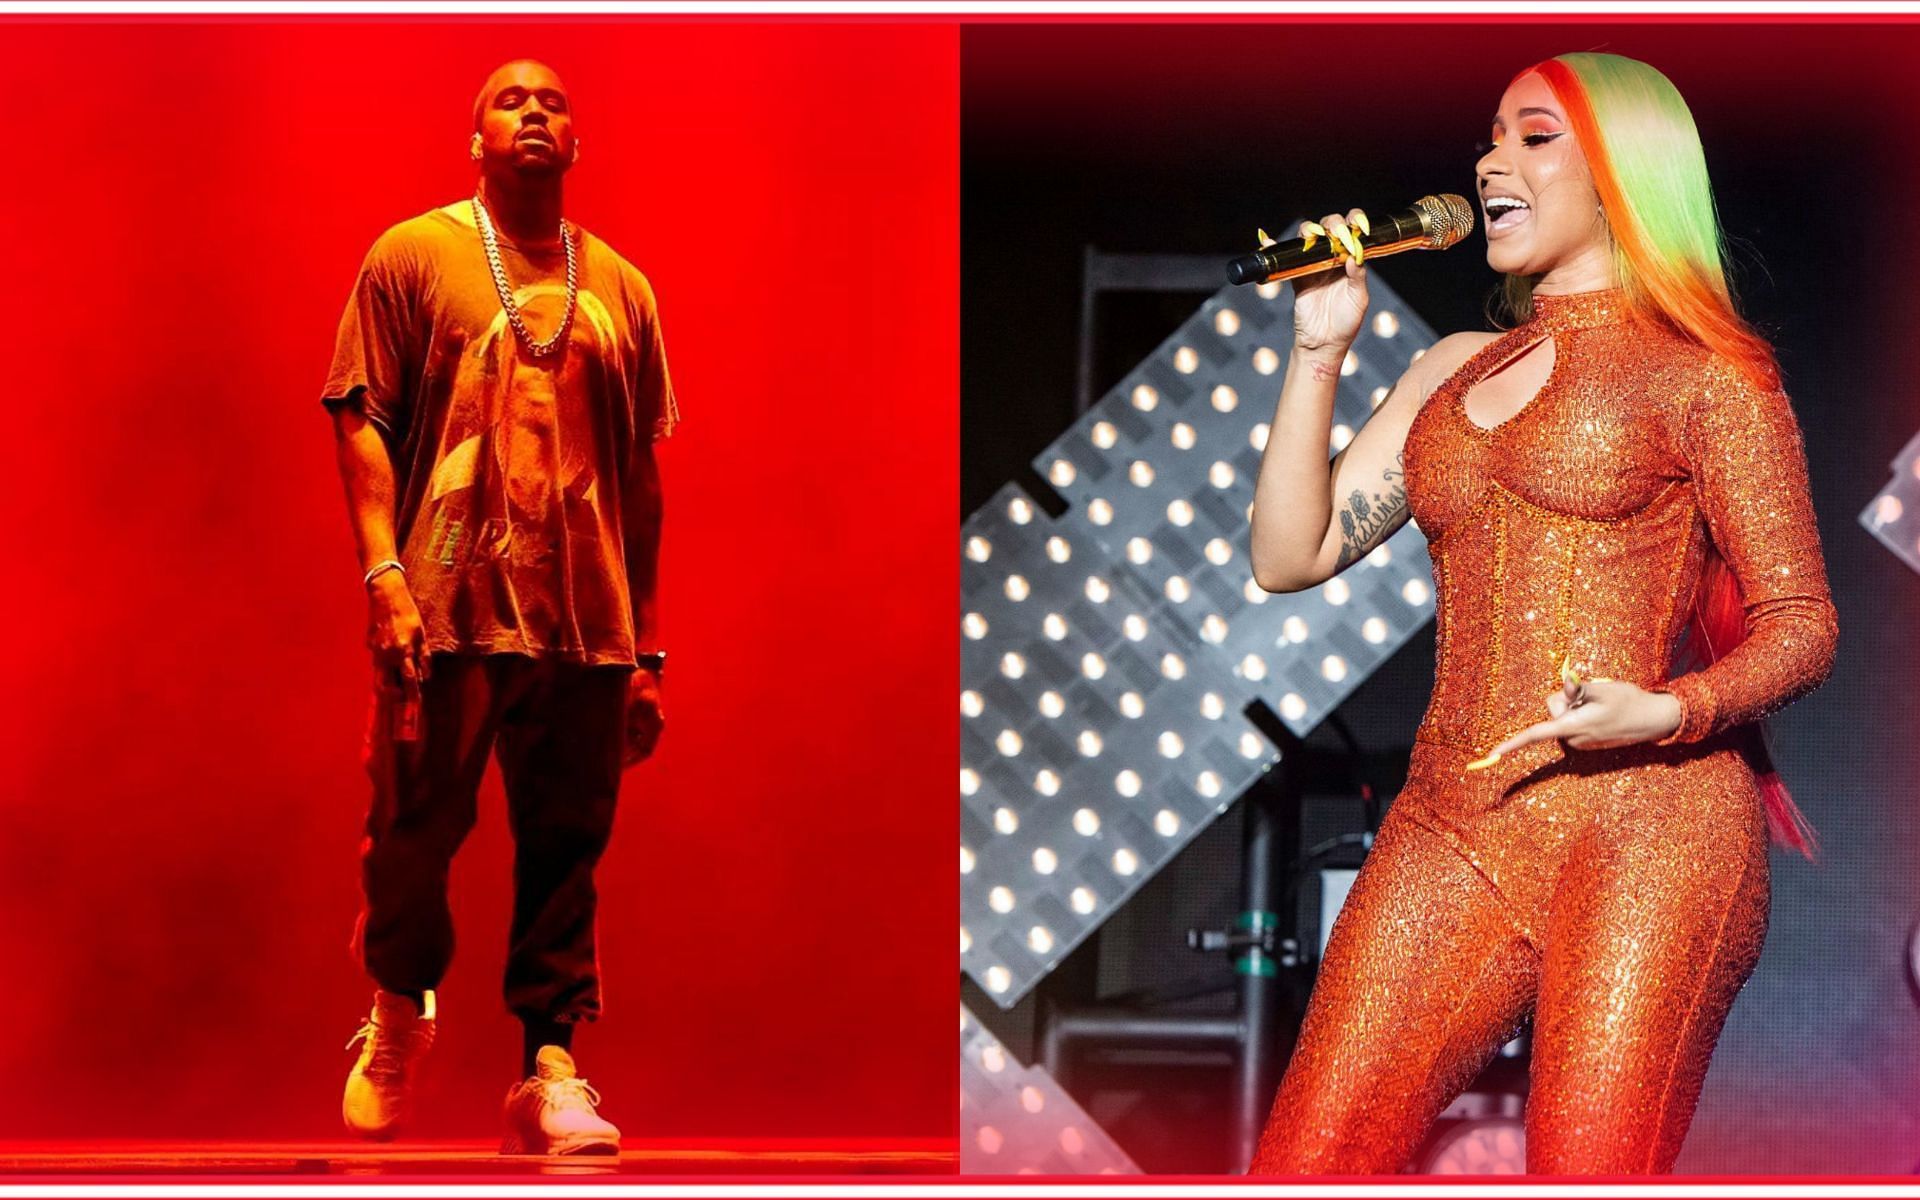 Cardi B recently released a new single featuring Kanye West with a reference to WWE Legend Jimmy Snuka